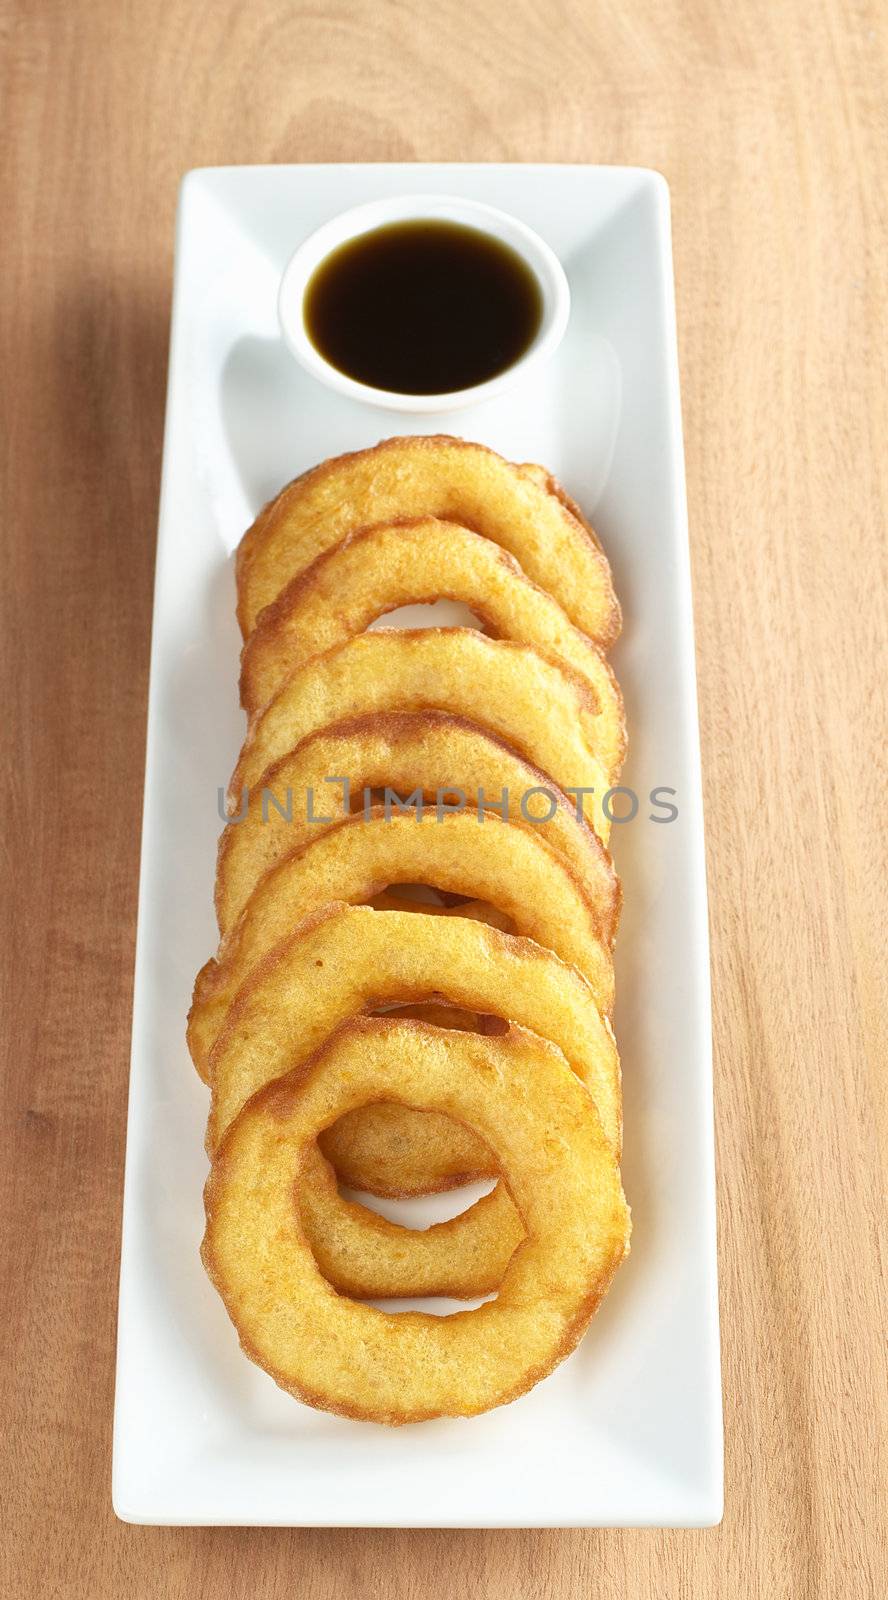 Popular Peruvian dessert called Picarones made from squash and sweet potato and served with Chancaca syrup (kind of honey), which is the black sauce (Selective Focus, Focus on the first two rings)